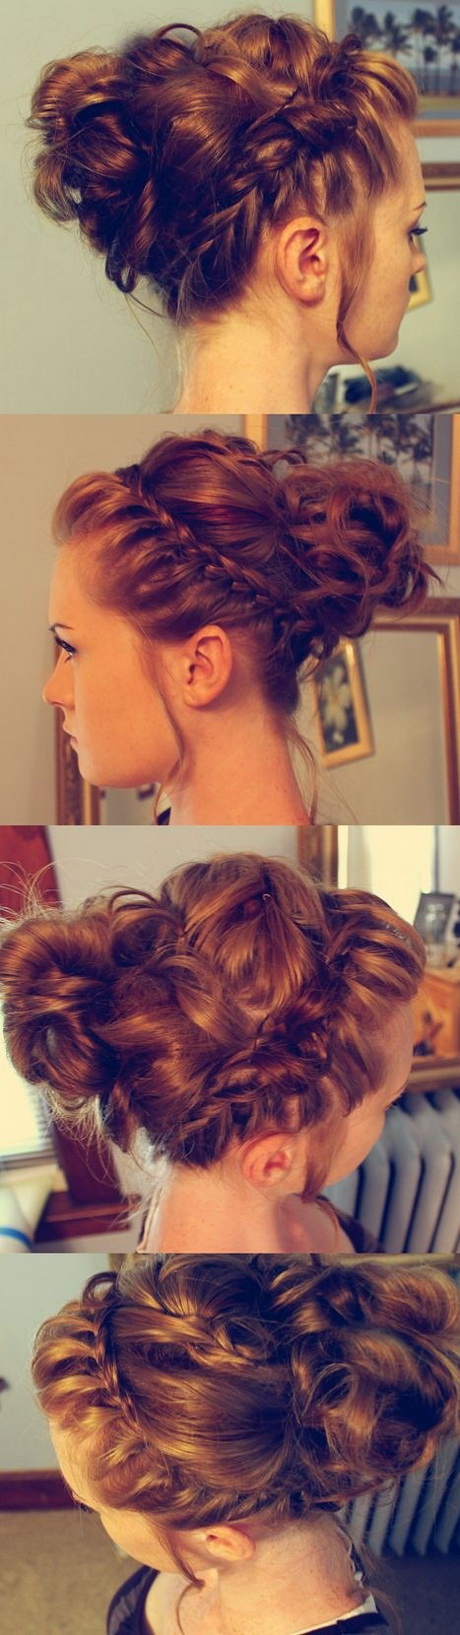 up-hairstyles-2015-48-10 Up hairstyles 2015